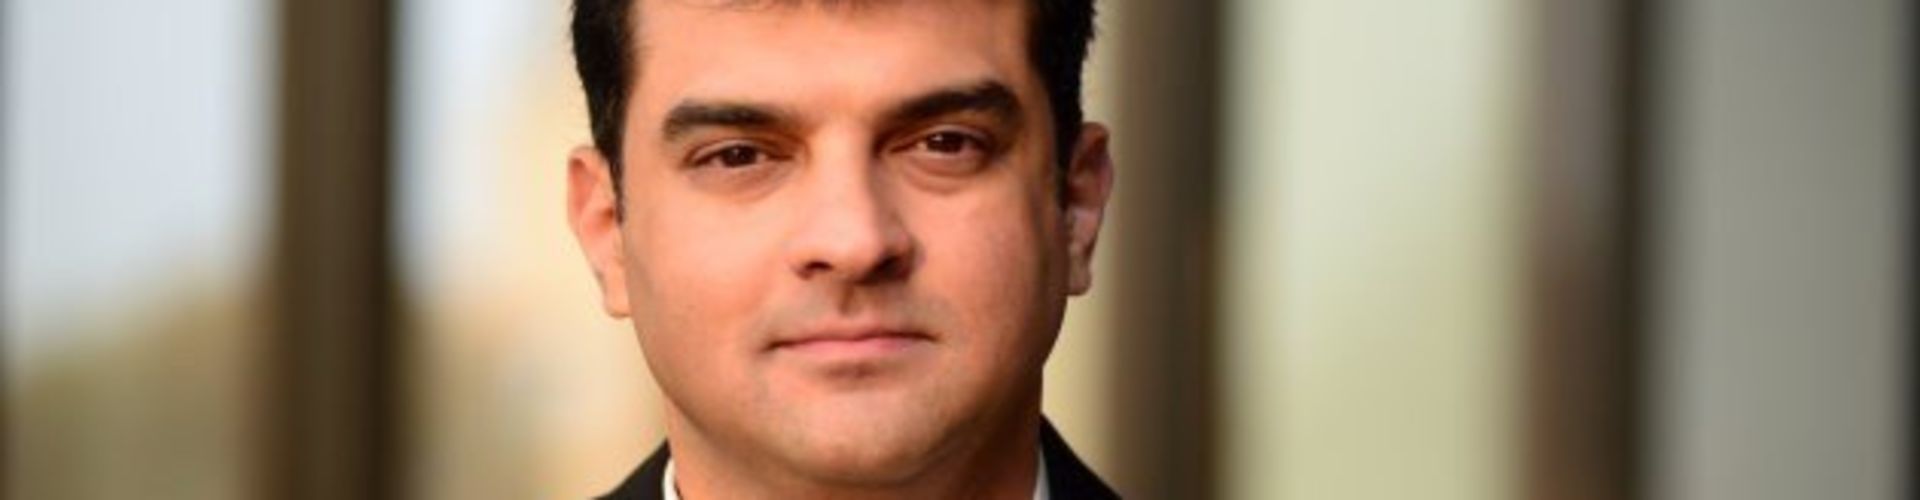 Siddharth Roy Kapur collaborates with Reliance Jio for original digital content